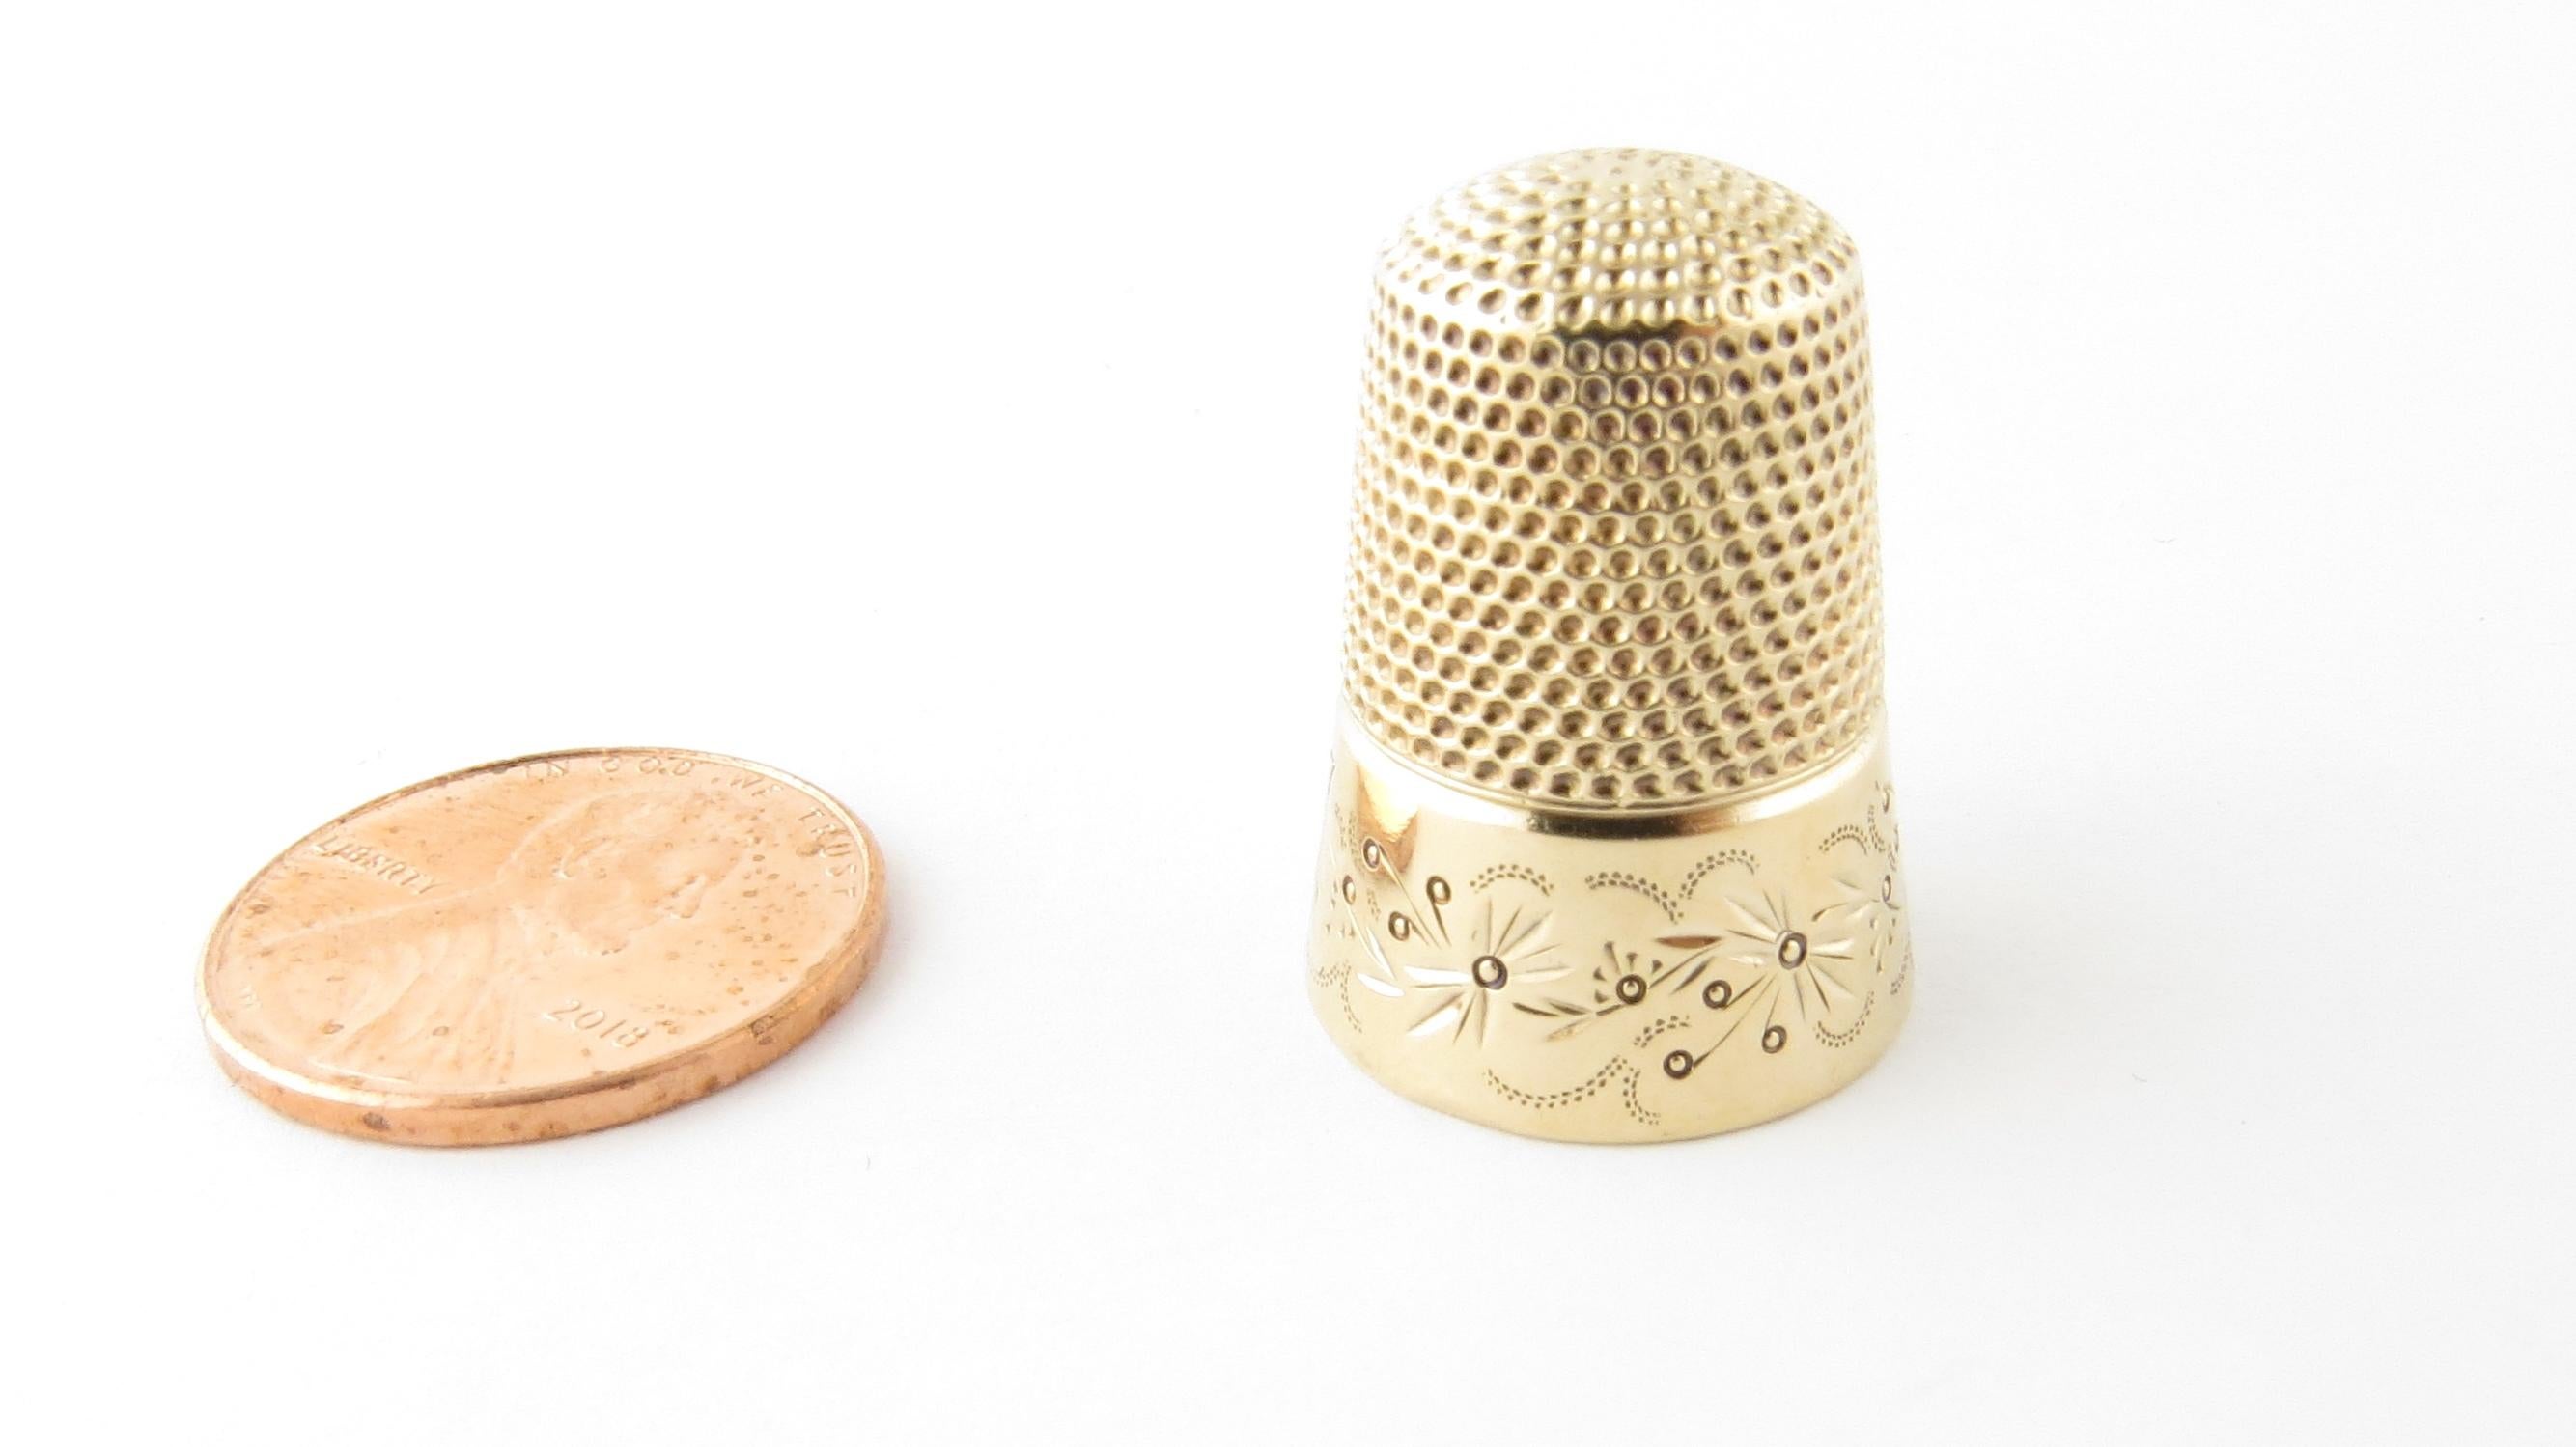 Vintage 14 Karat Yellow Gold Thimble

This lovely thimble is crafted in meticulously detailed 14K yellow gold.

Size: 22 mm x 17 mm

Weight: 3.6 dwt. / 5.7 gr.

Acid tested for 14K gold.

Very good condition, professionally polished. Will come